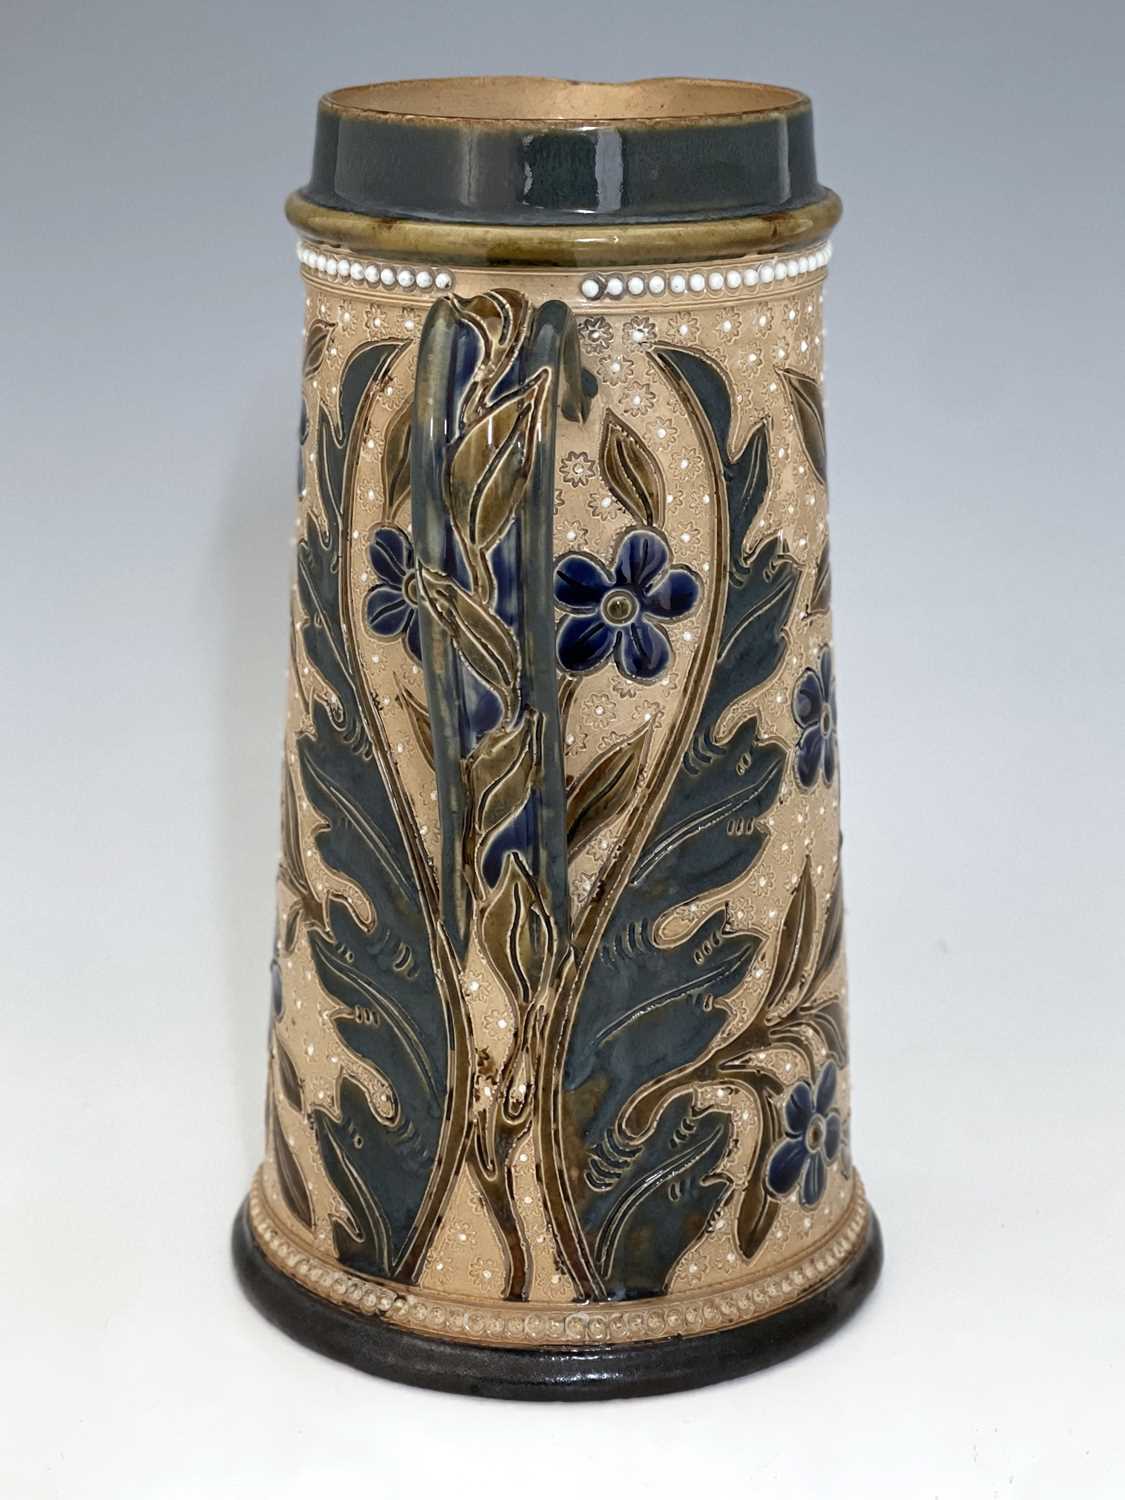 Louisa Davis for Doulton Lambeth, a stoneware jug, 1877, conical form, sgraffito decorated with - Image 5 of 7